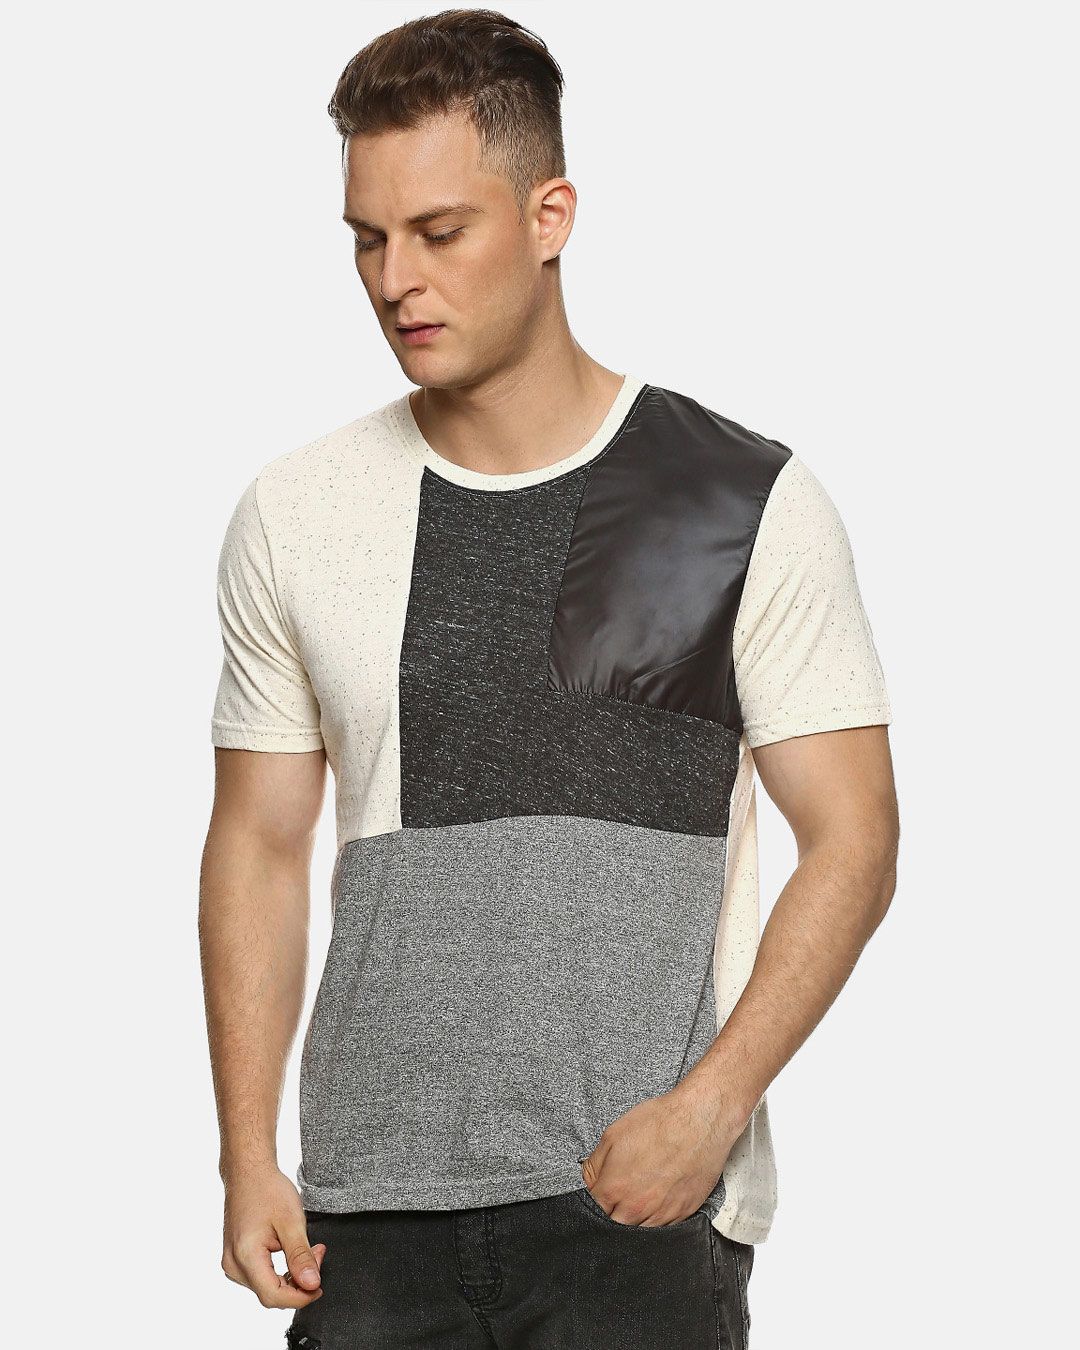 Shop Solid Men's Round or Crew Grey T-Shirt-Back